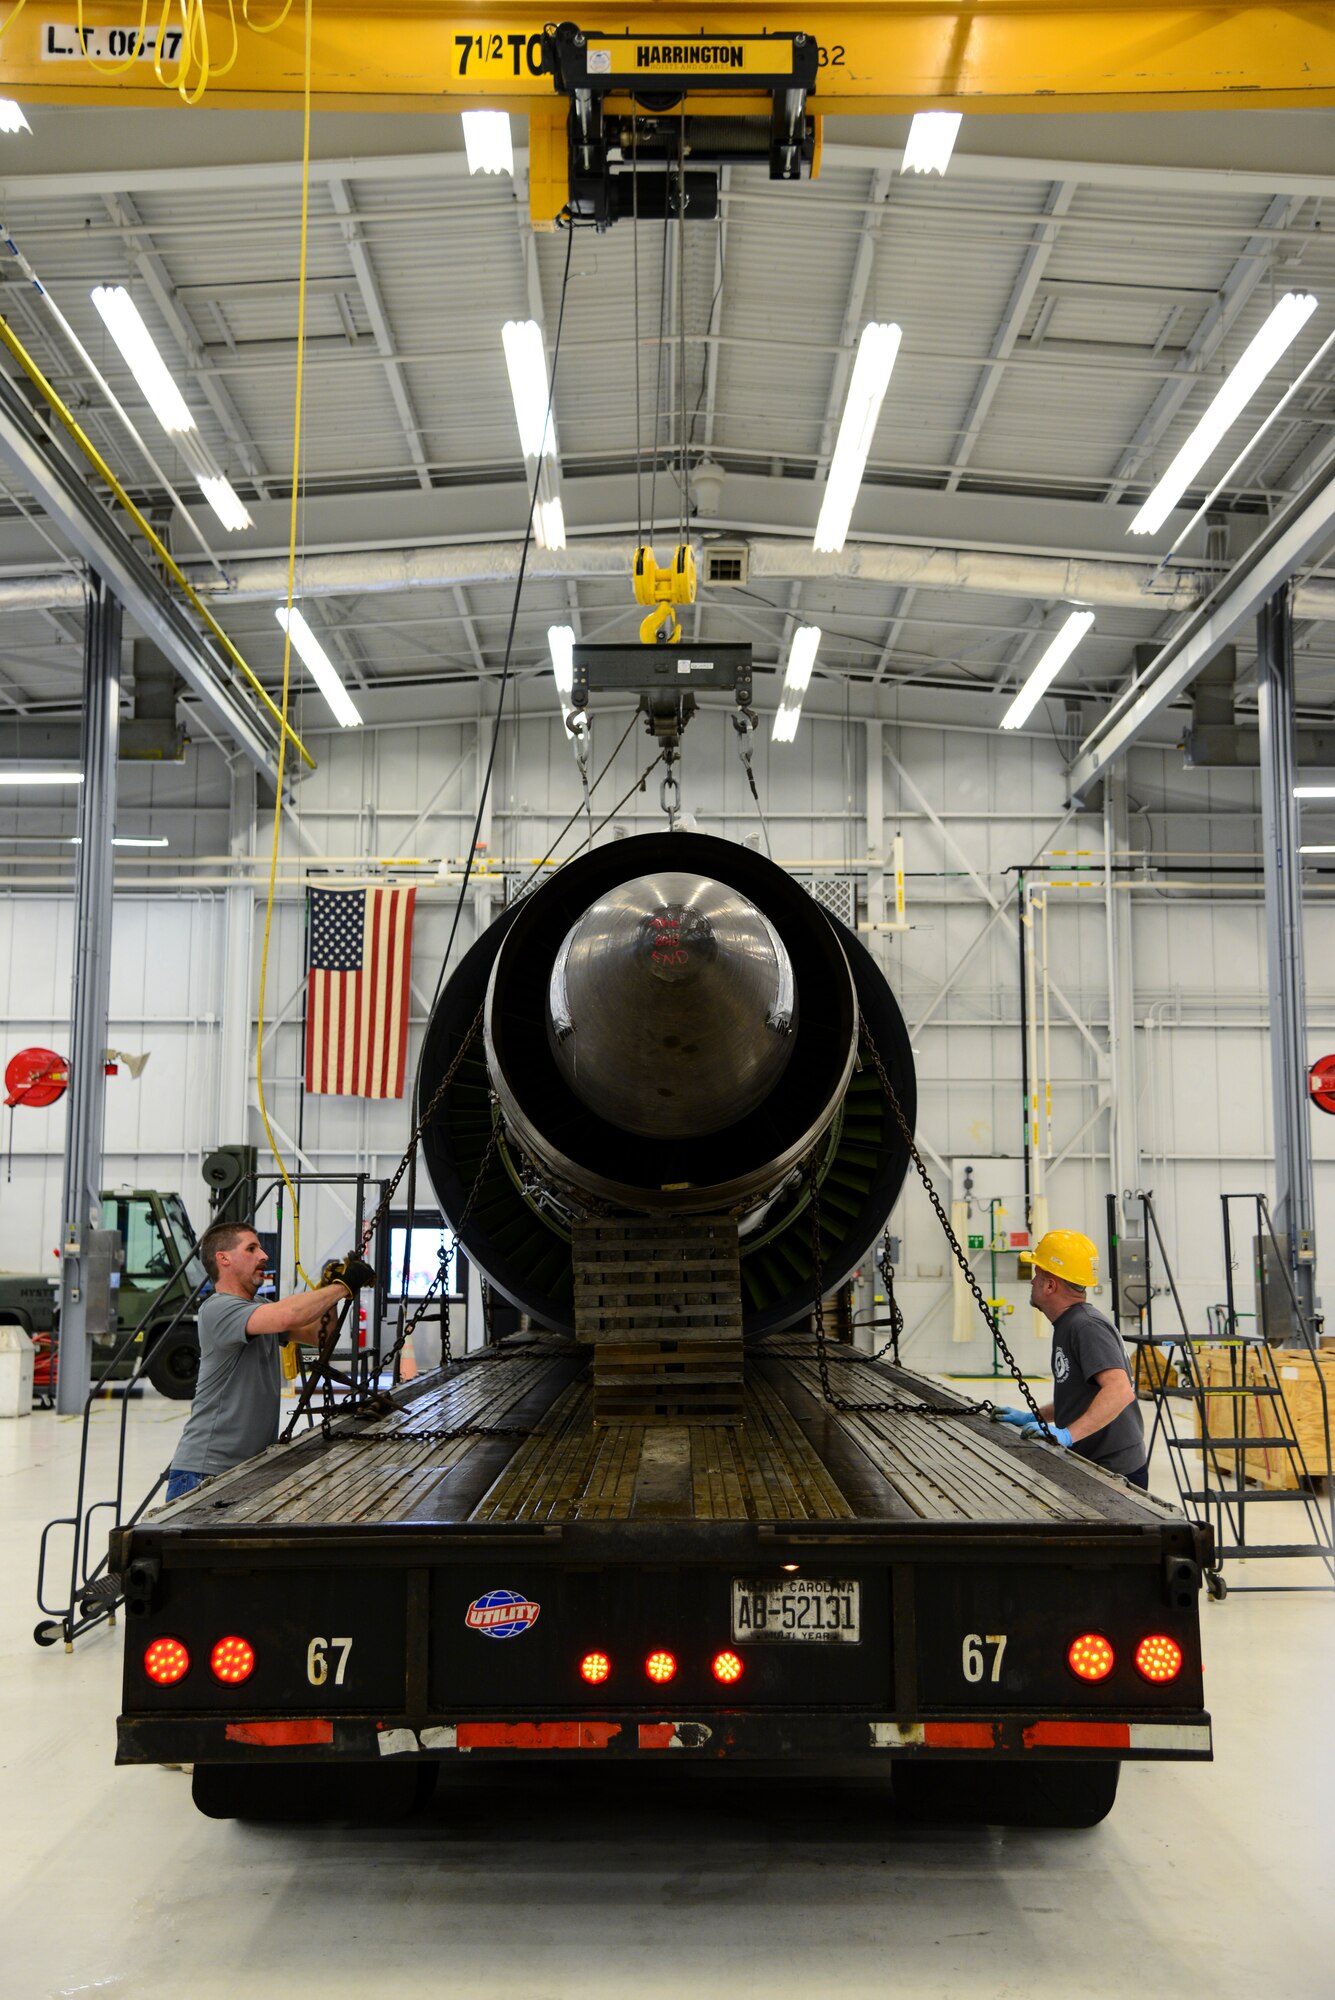 Wesley Currin (left), Triple J Trucking driver from Jacksonville, N.C., and Michael Tatum, 436th Maintenance Squadron aerospace propulsion engine mechanic, secure the last production General Electric TF-39 turbofan engine to a tractor trailer Feb. 16, 2018, at Dover Air Force Base, Del. Since 2015, 144 TF-39 engines were turned in through a joint process involving the Air Force and General Electric, where they were sold to a metals reclamation company in Monroe, N.C. (U.S. Air Force photo by Staff Sgt. Aaron J. Jenne)